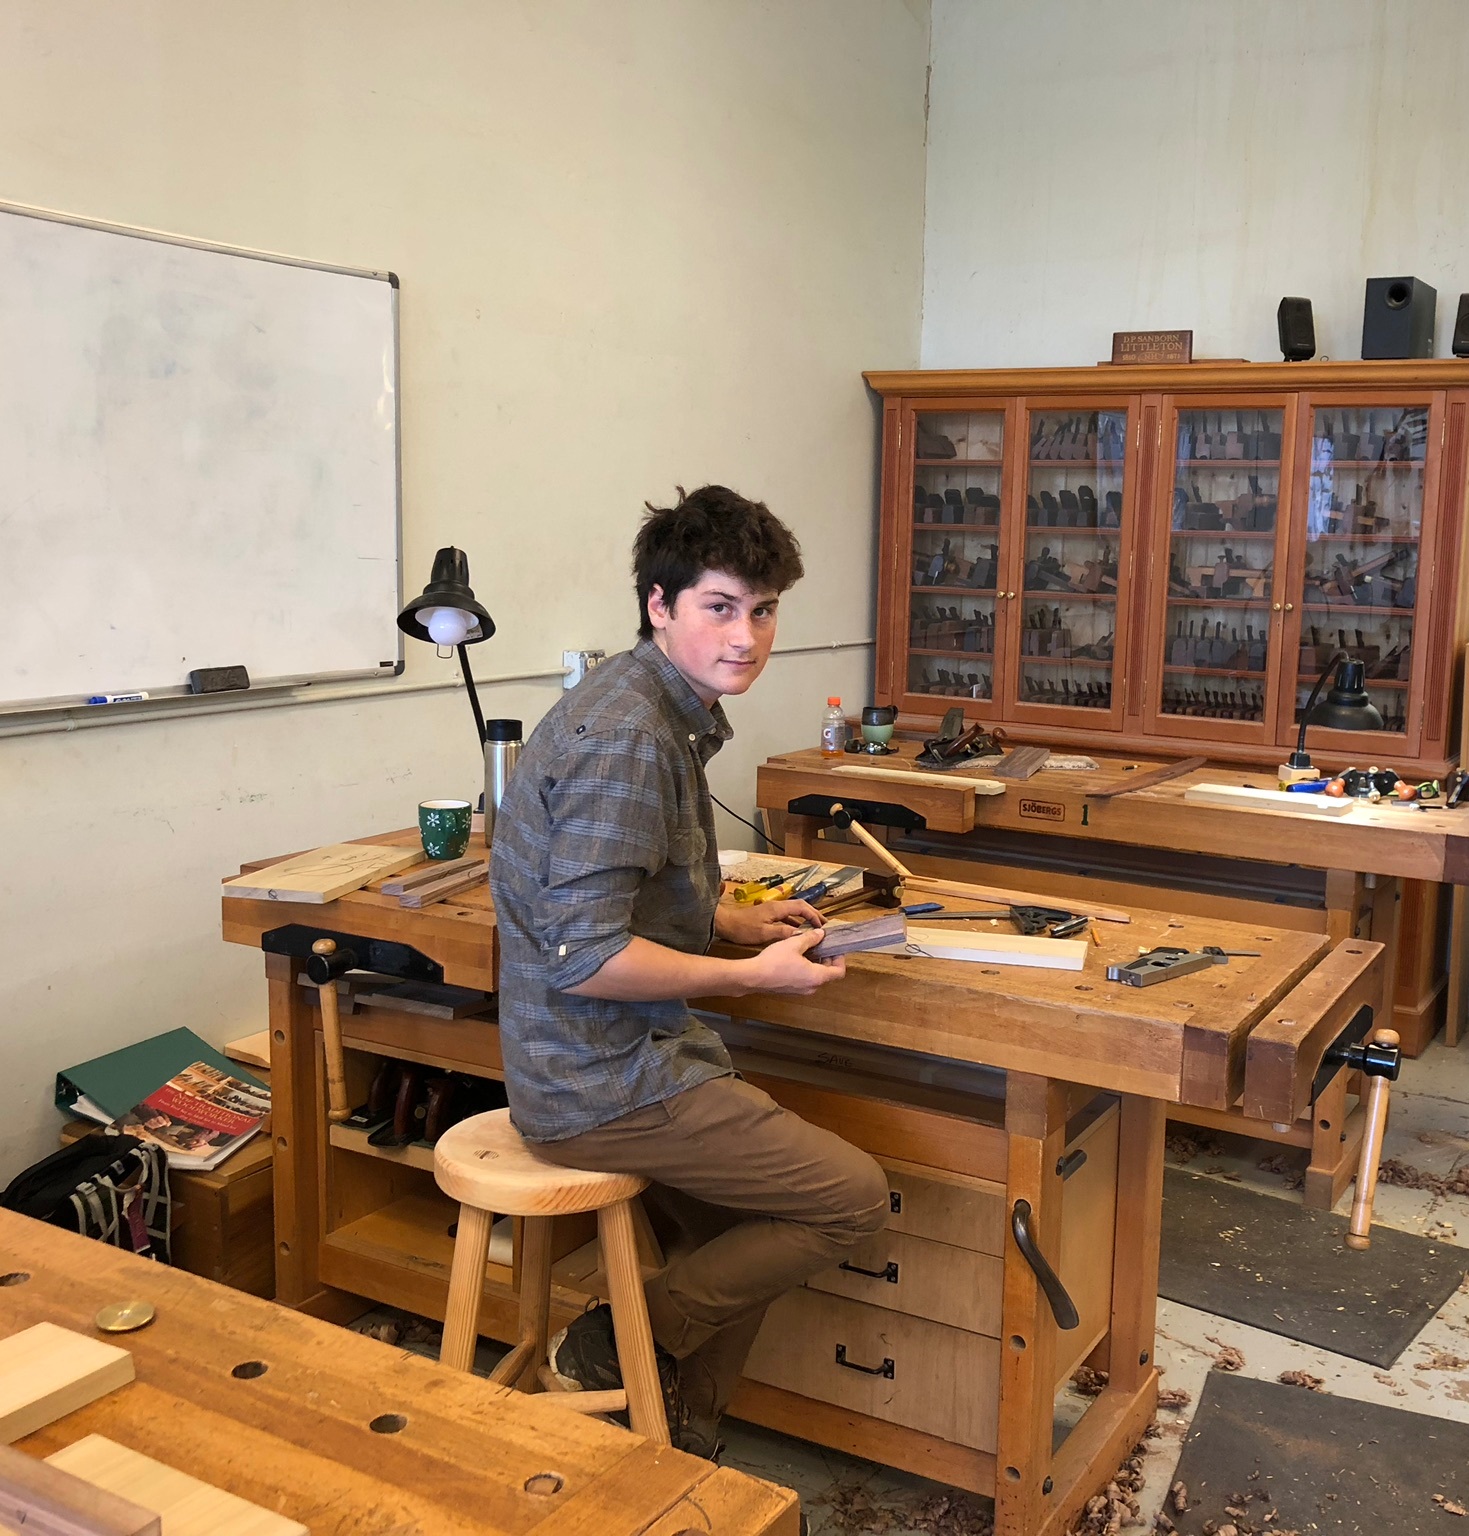 Foundations Of Woodworking I Consider Myself A Better Woodworker And Person For It Port Townsend School Of Woodworking